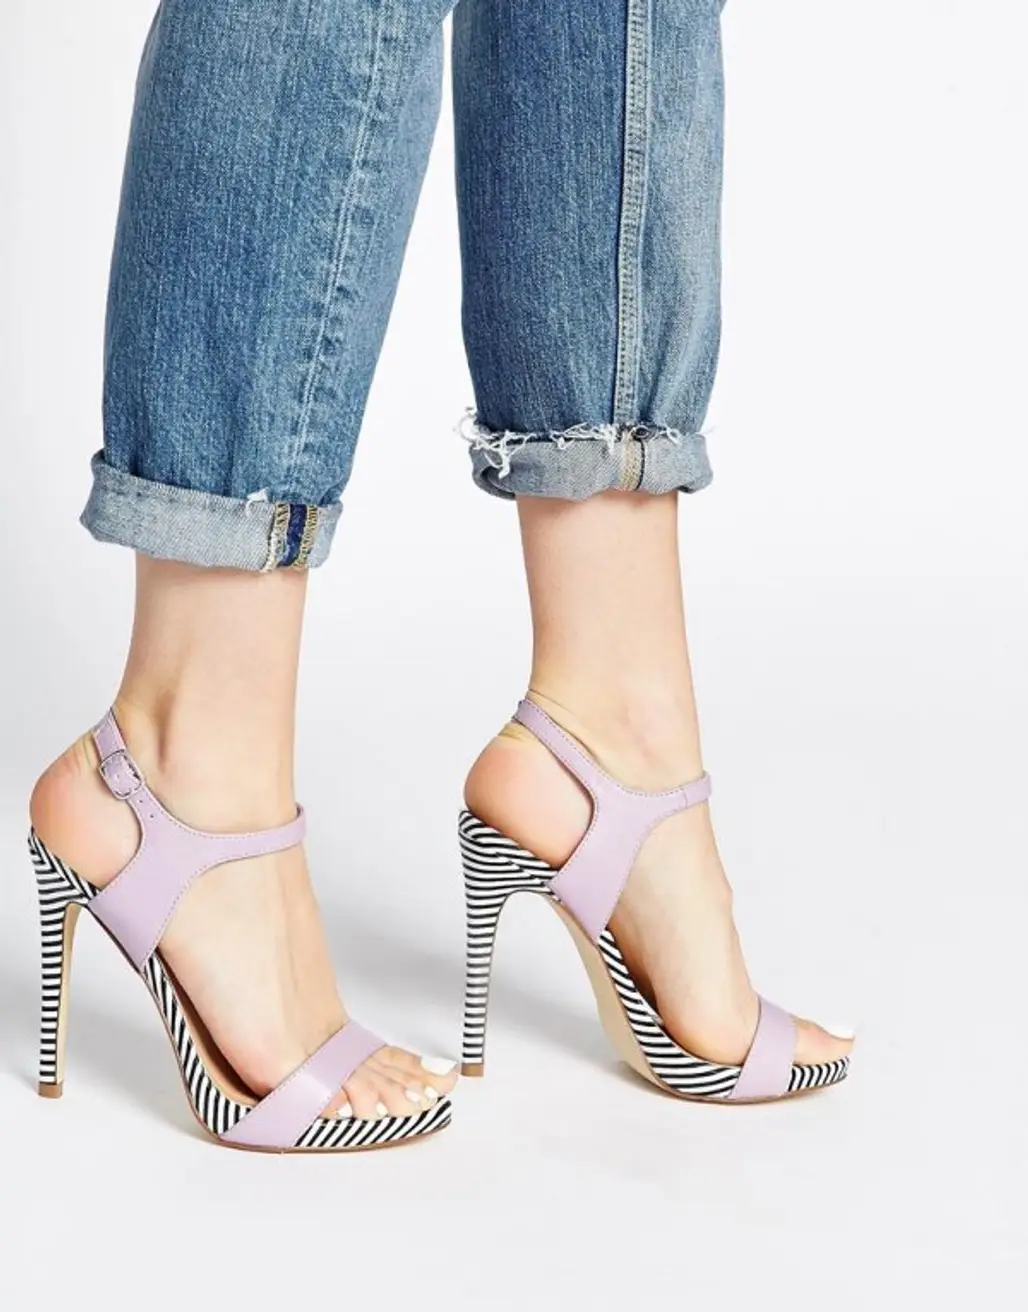 Lilac and Stripe Heeled Sandals